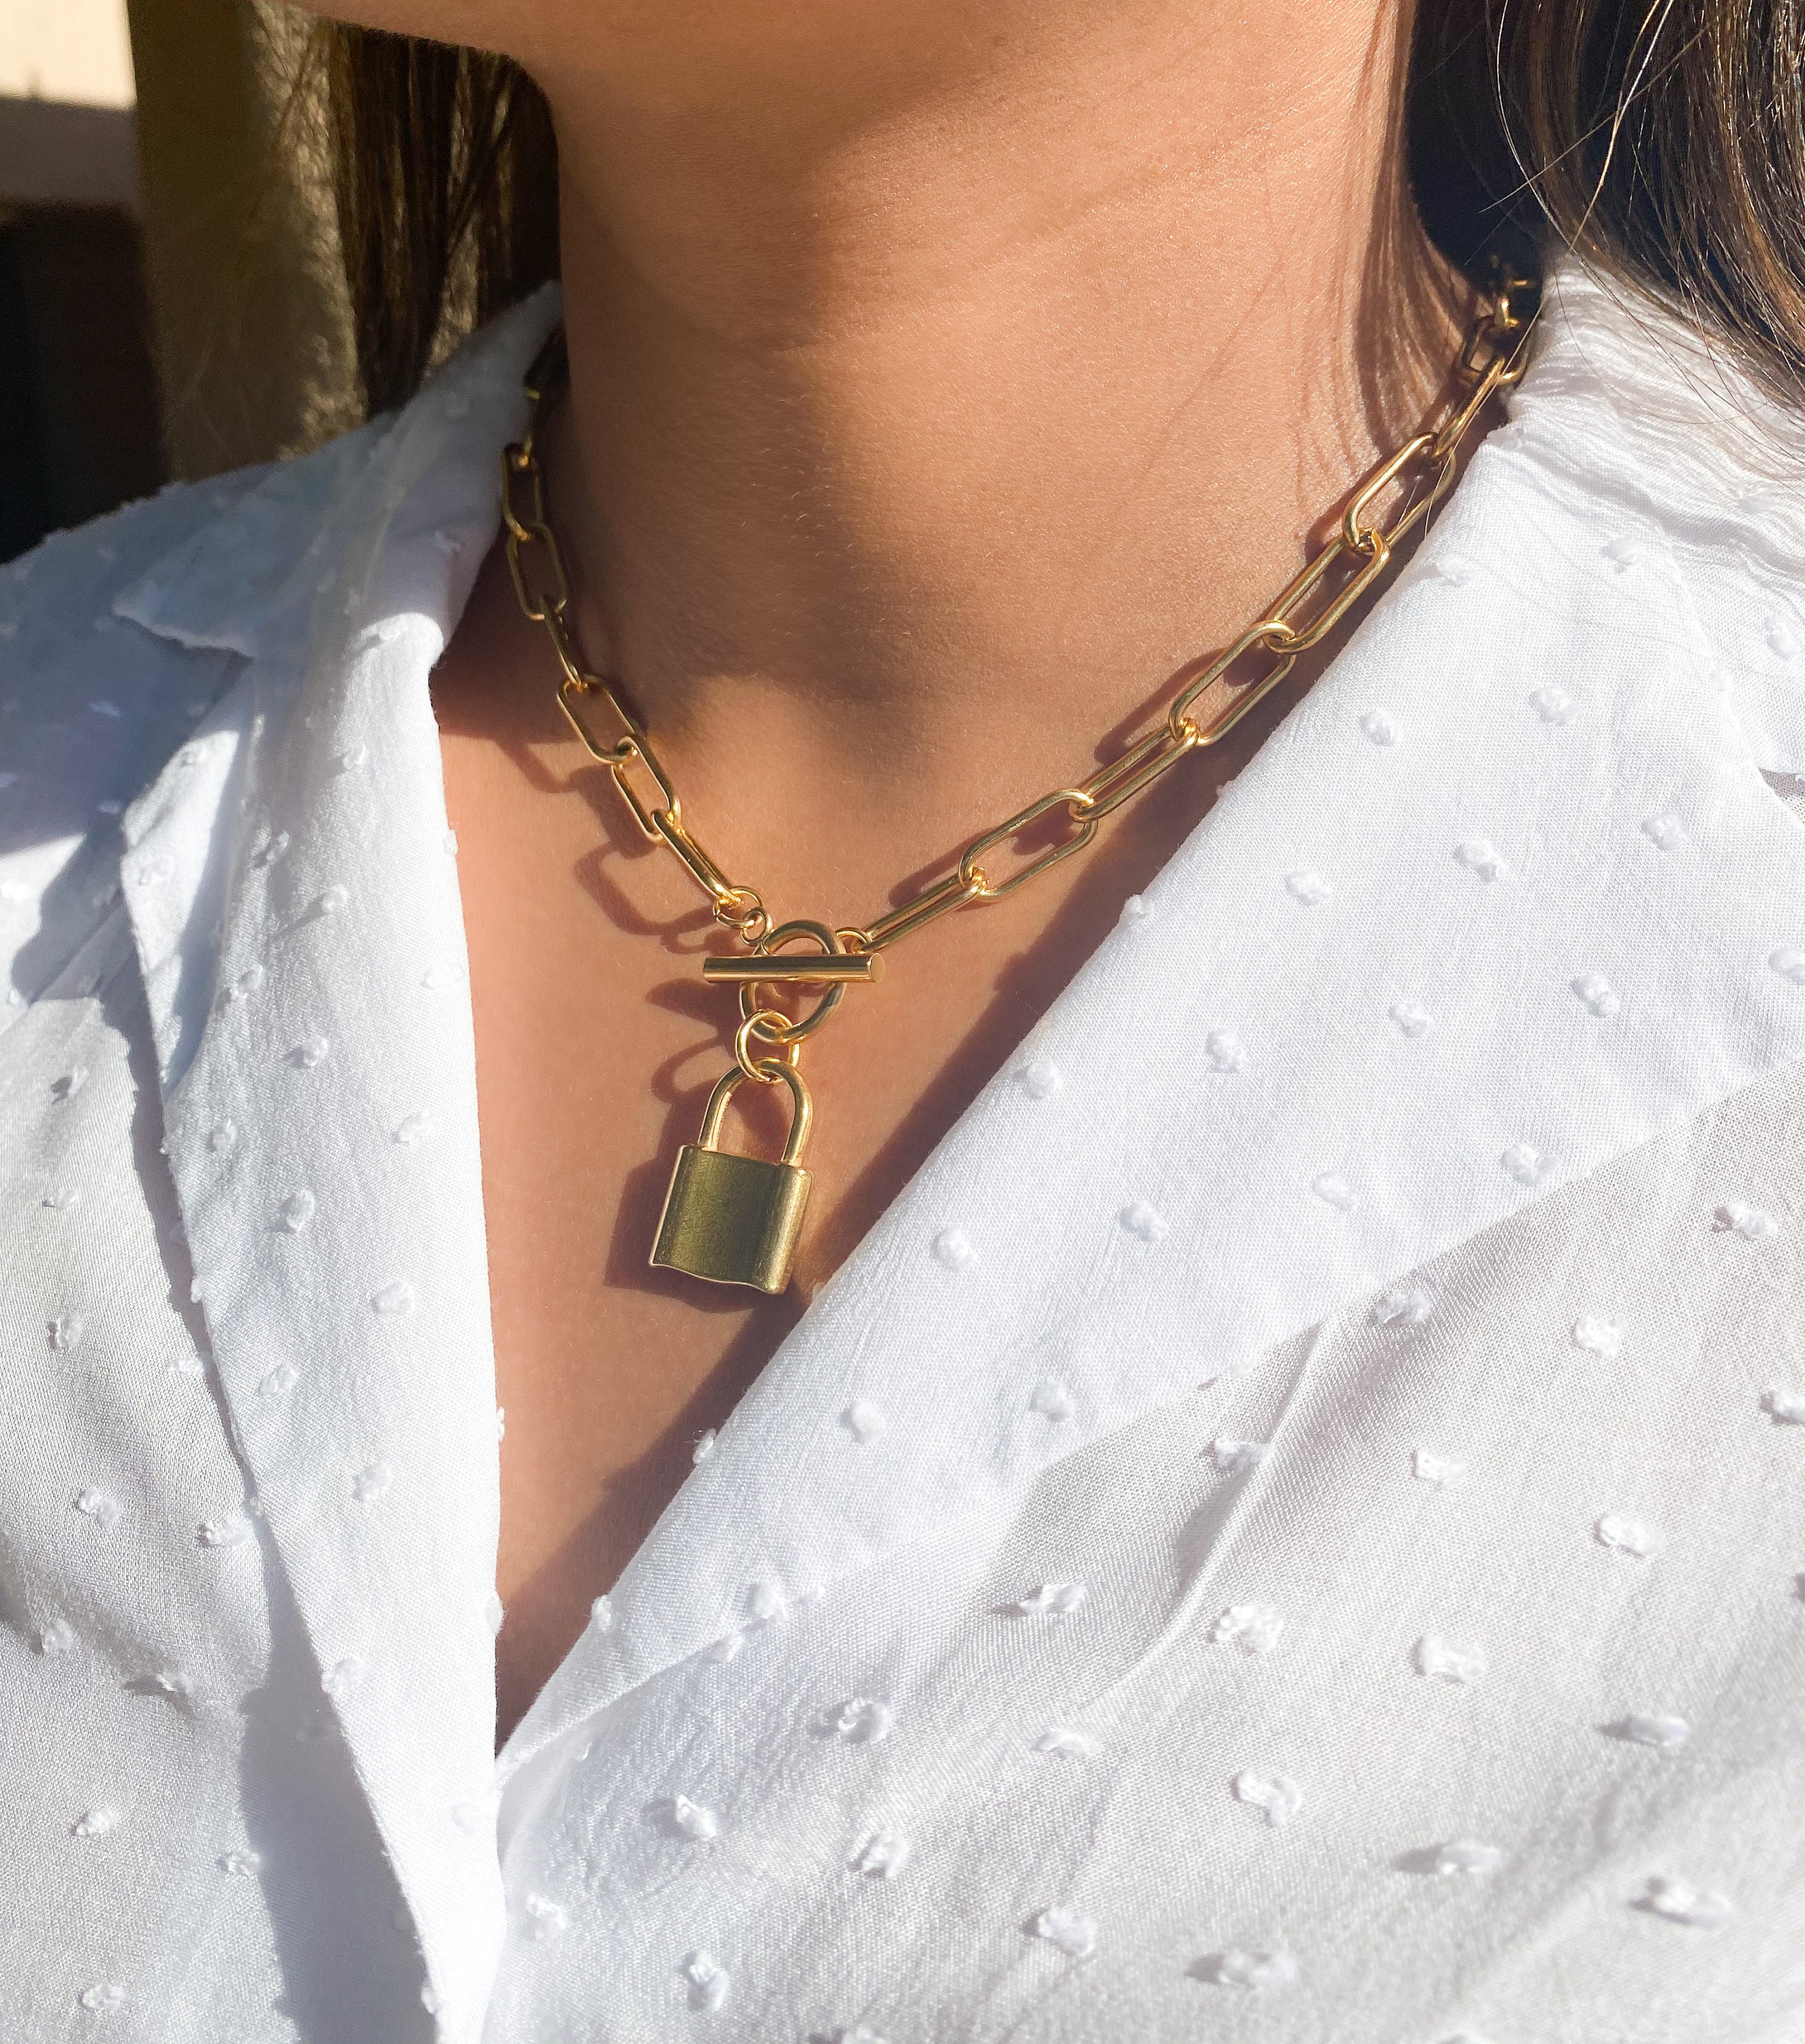 Paperclip Chain Lock Necklace